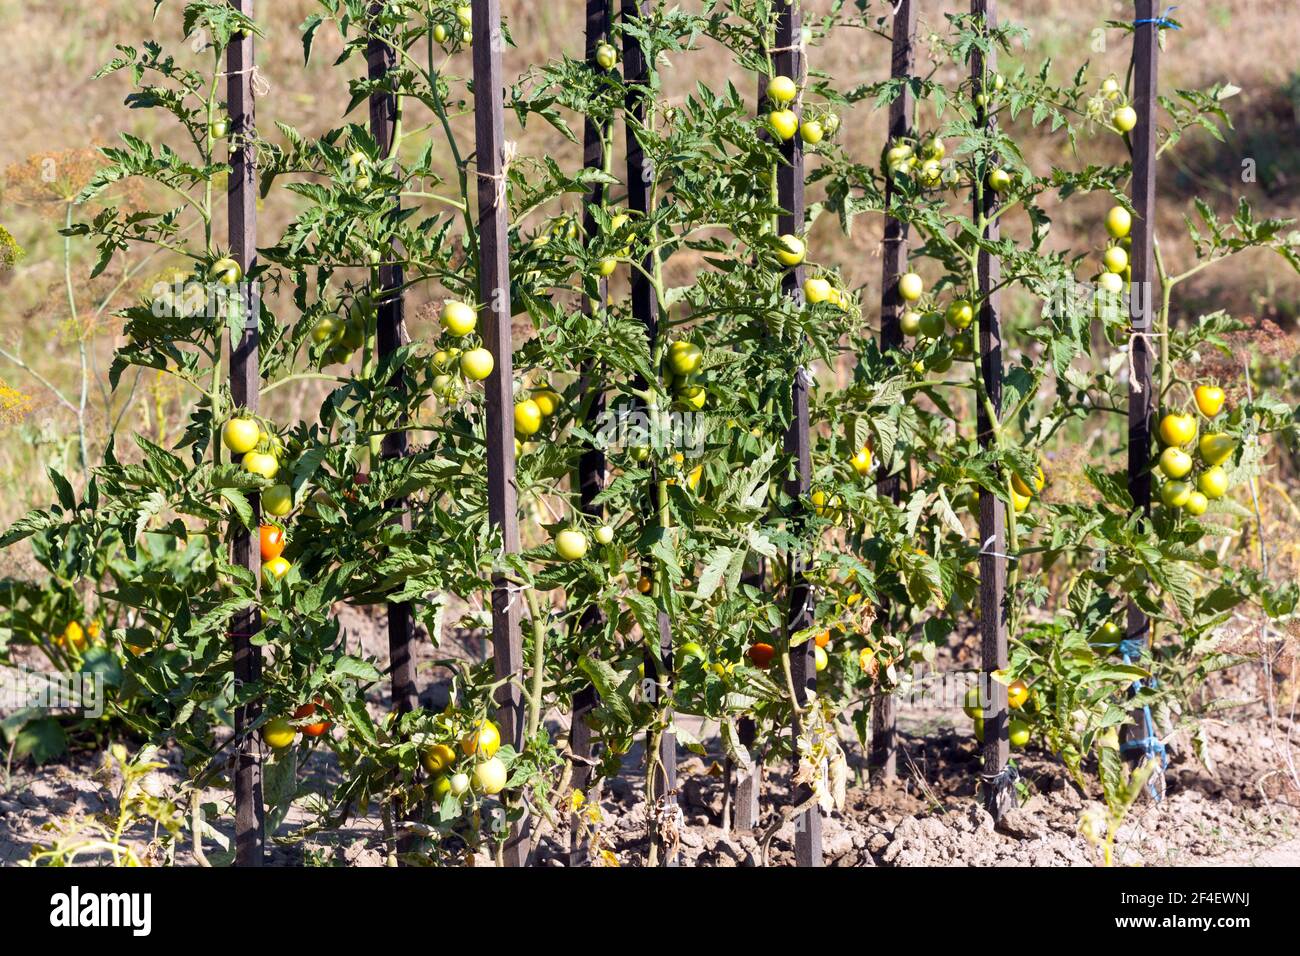 Wooden sticks as a support for ripening tomato plants Stock Photo